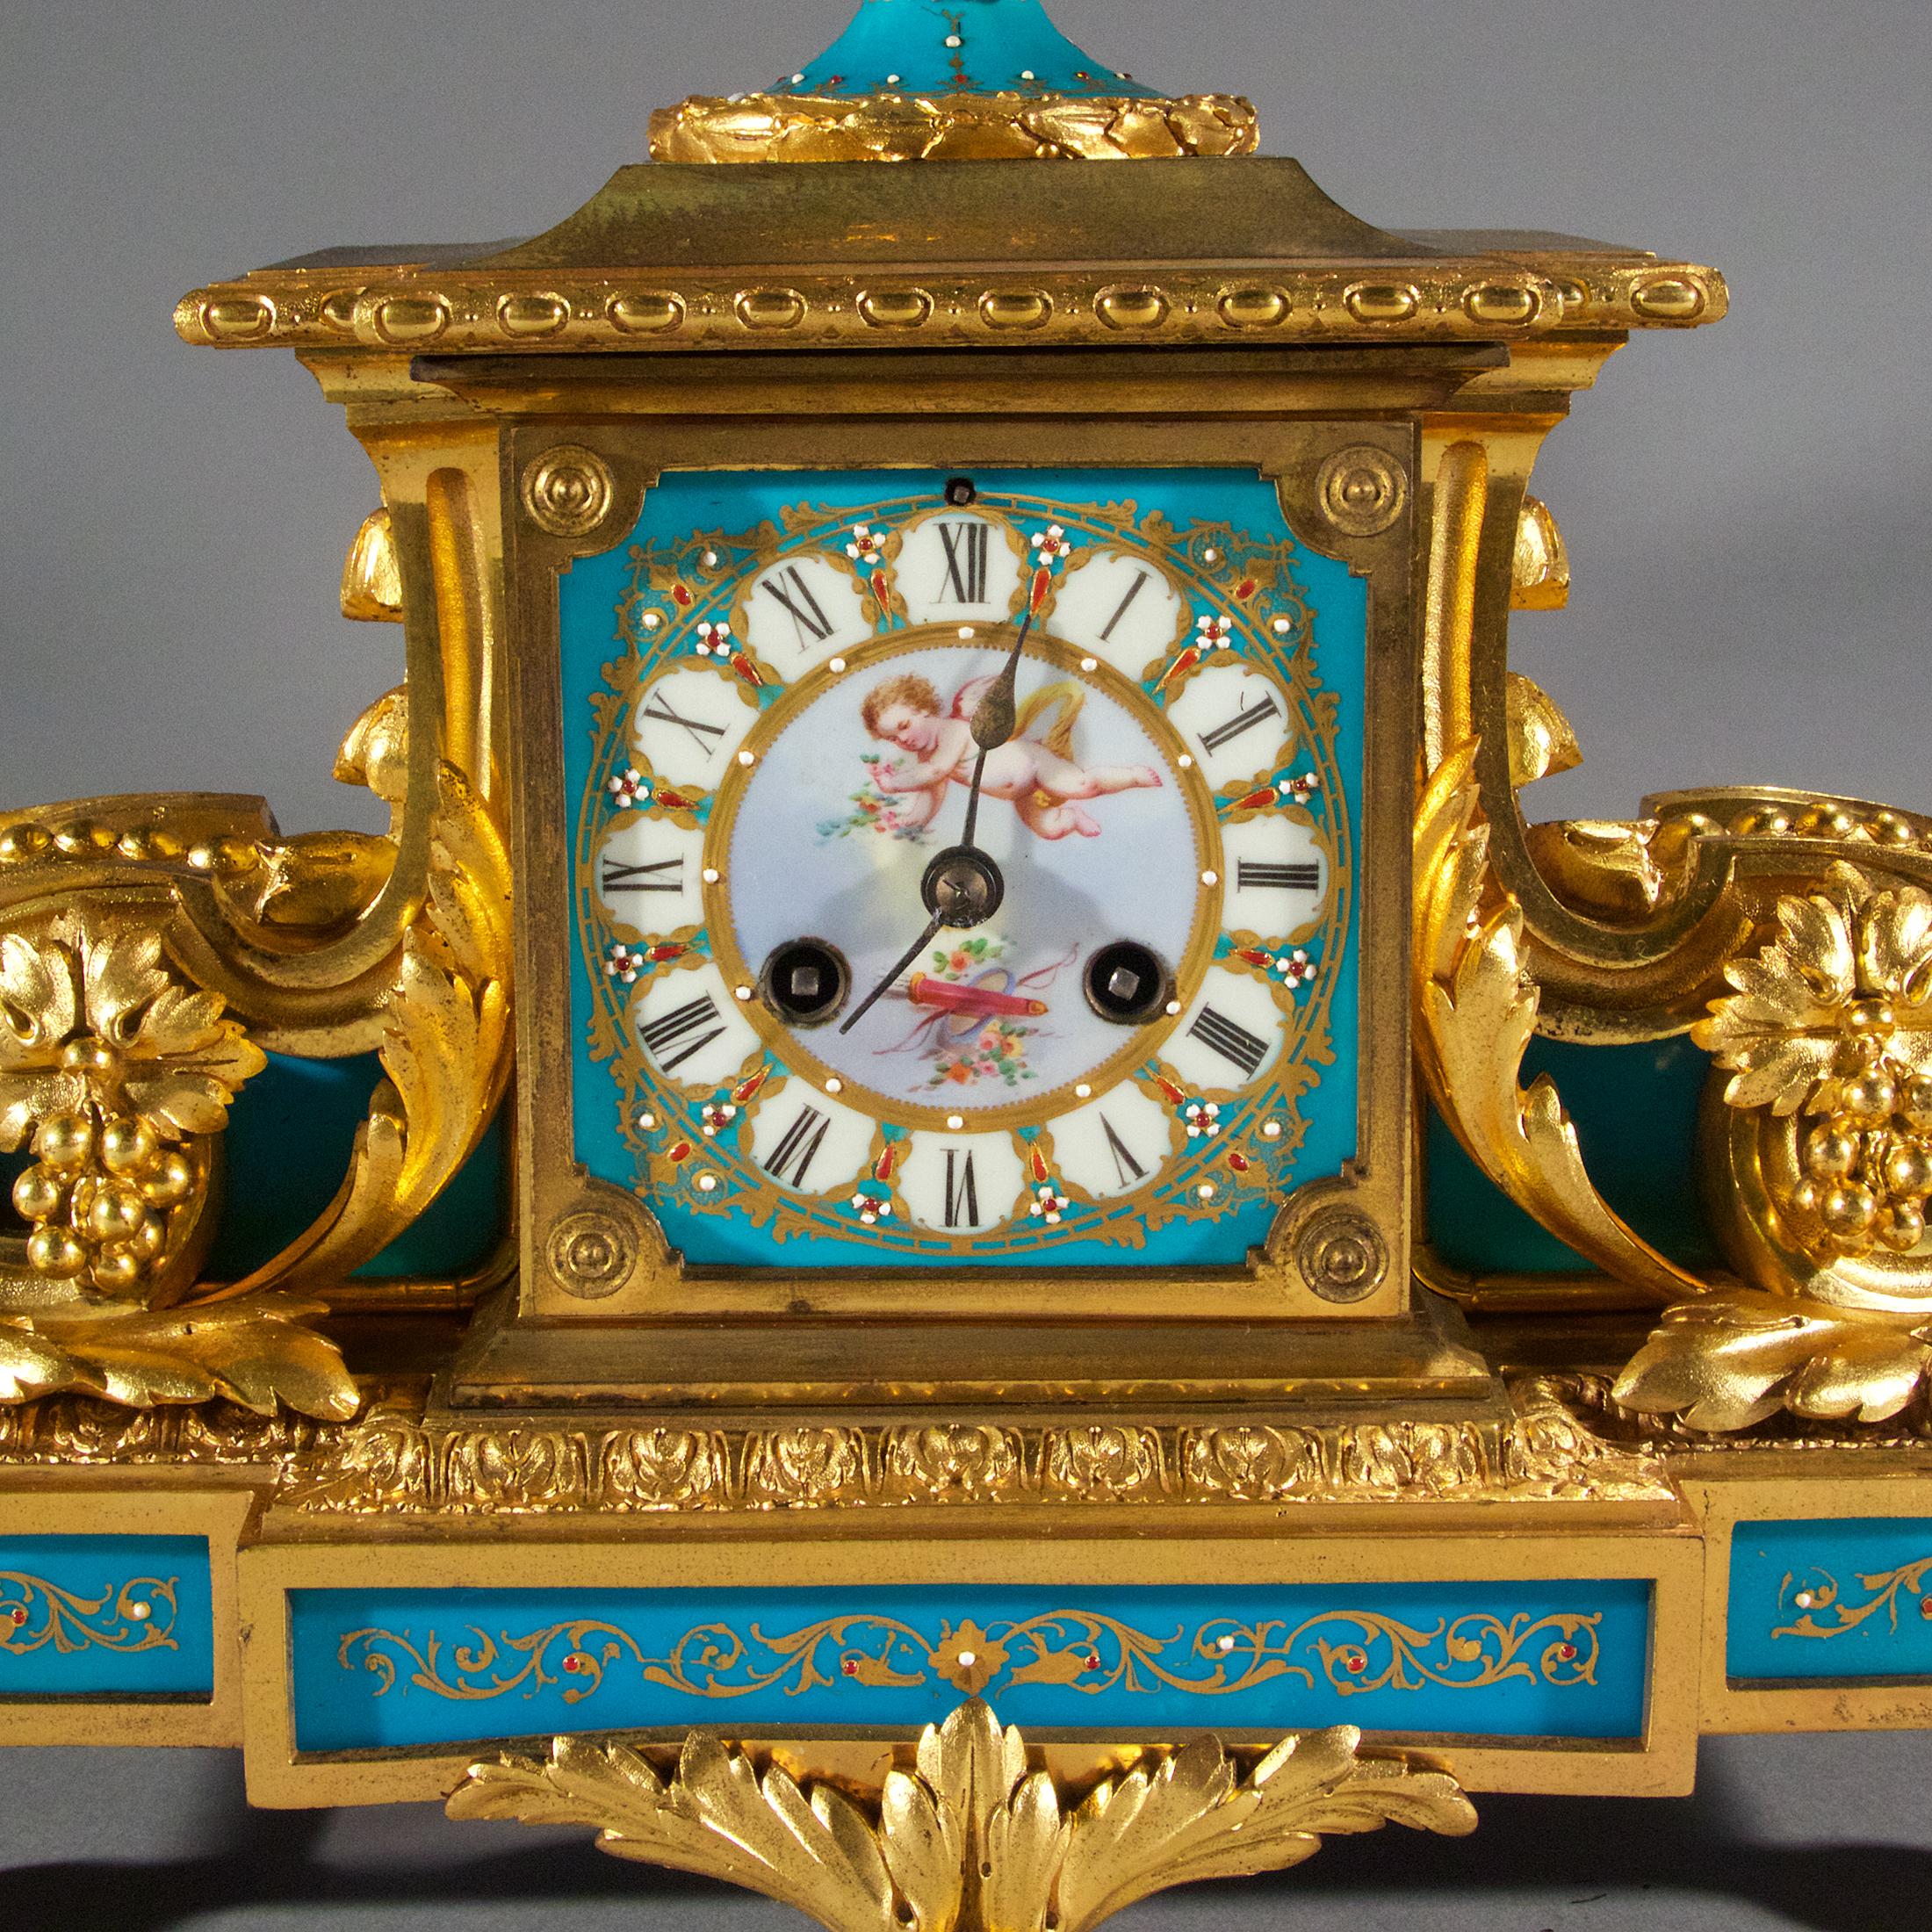 The fine quality Sèvres-style Louis XVI gilt-bronze and jeweled porcelain turquoise mantel clock. Surmounted with a twin handled urn with grapes, the central enamel dial with Roman numerals.

Origin: French
Date: 19th century
Dimension: 12 1/2 x